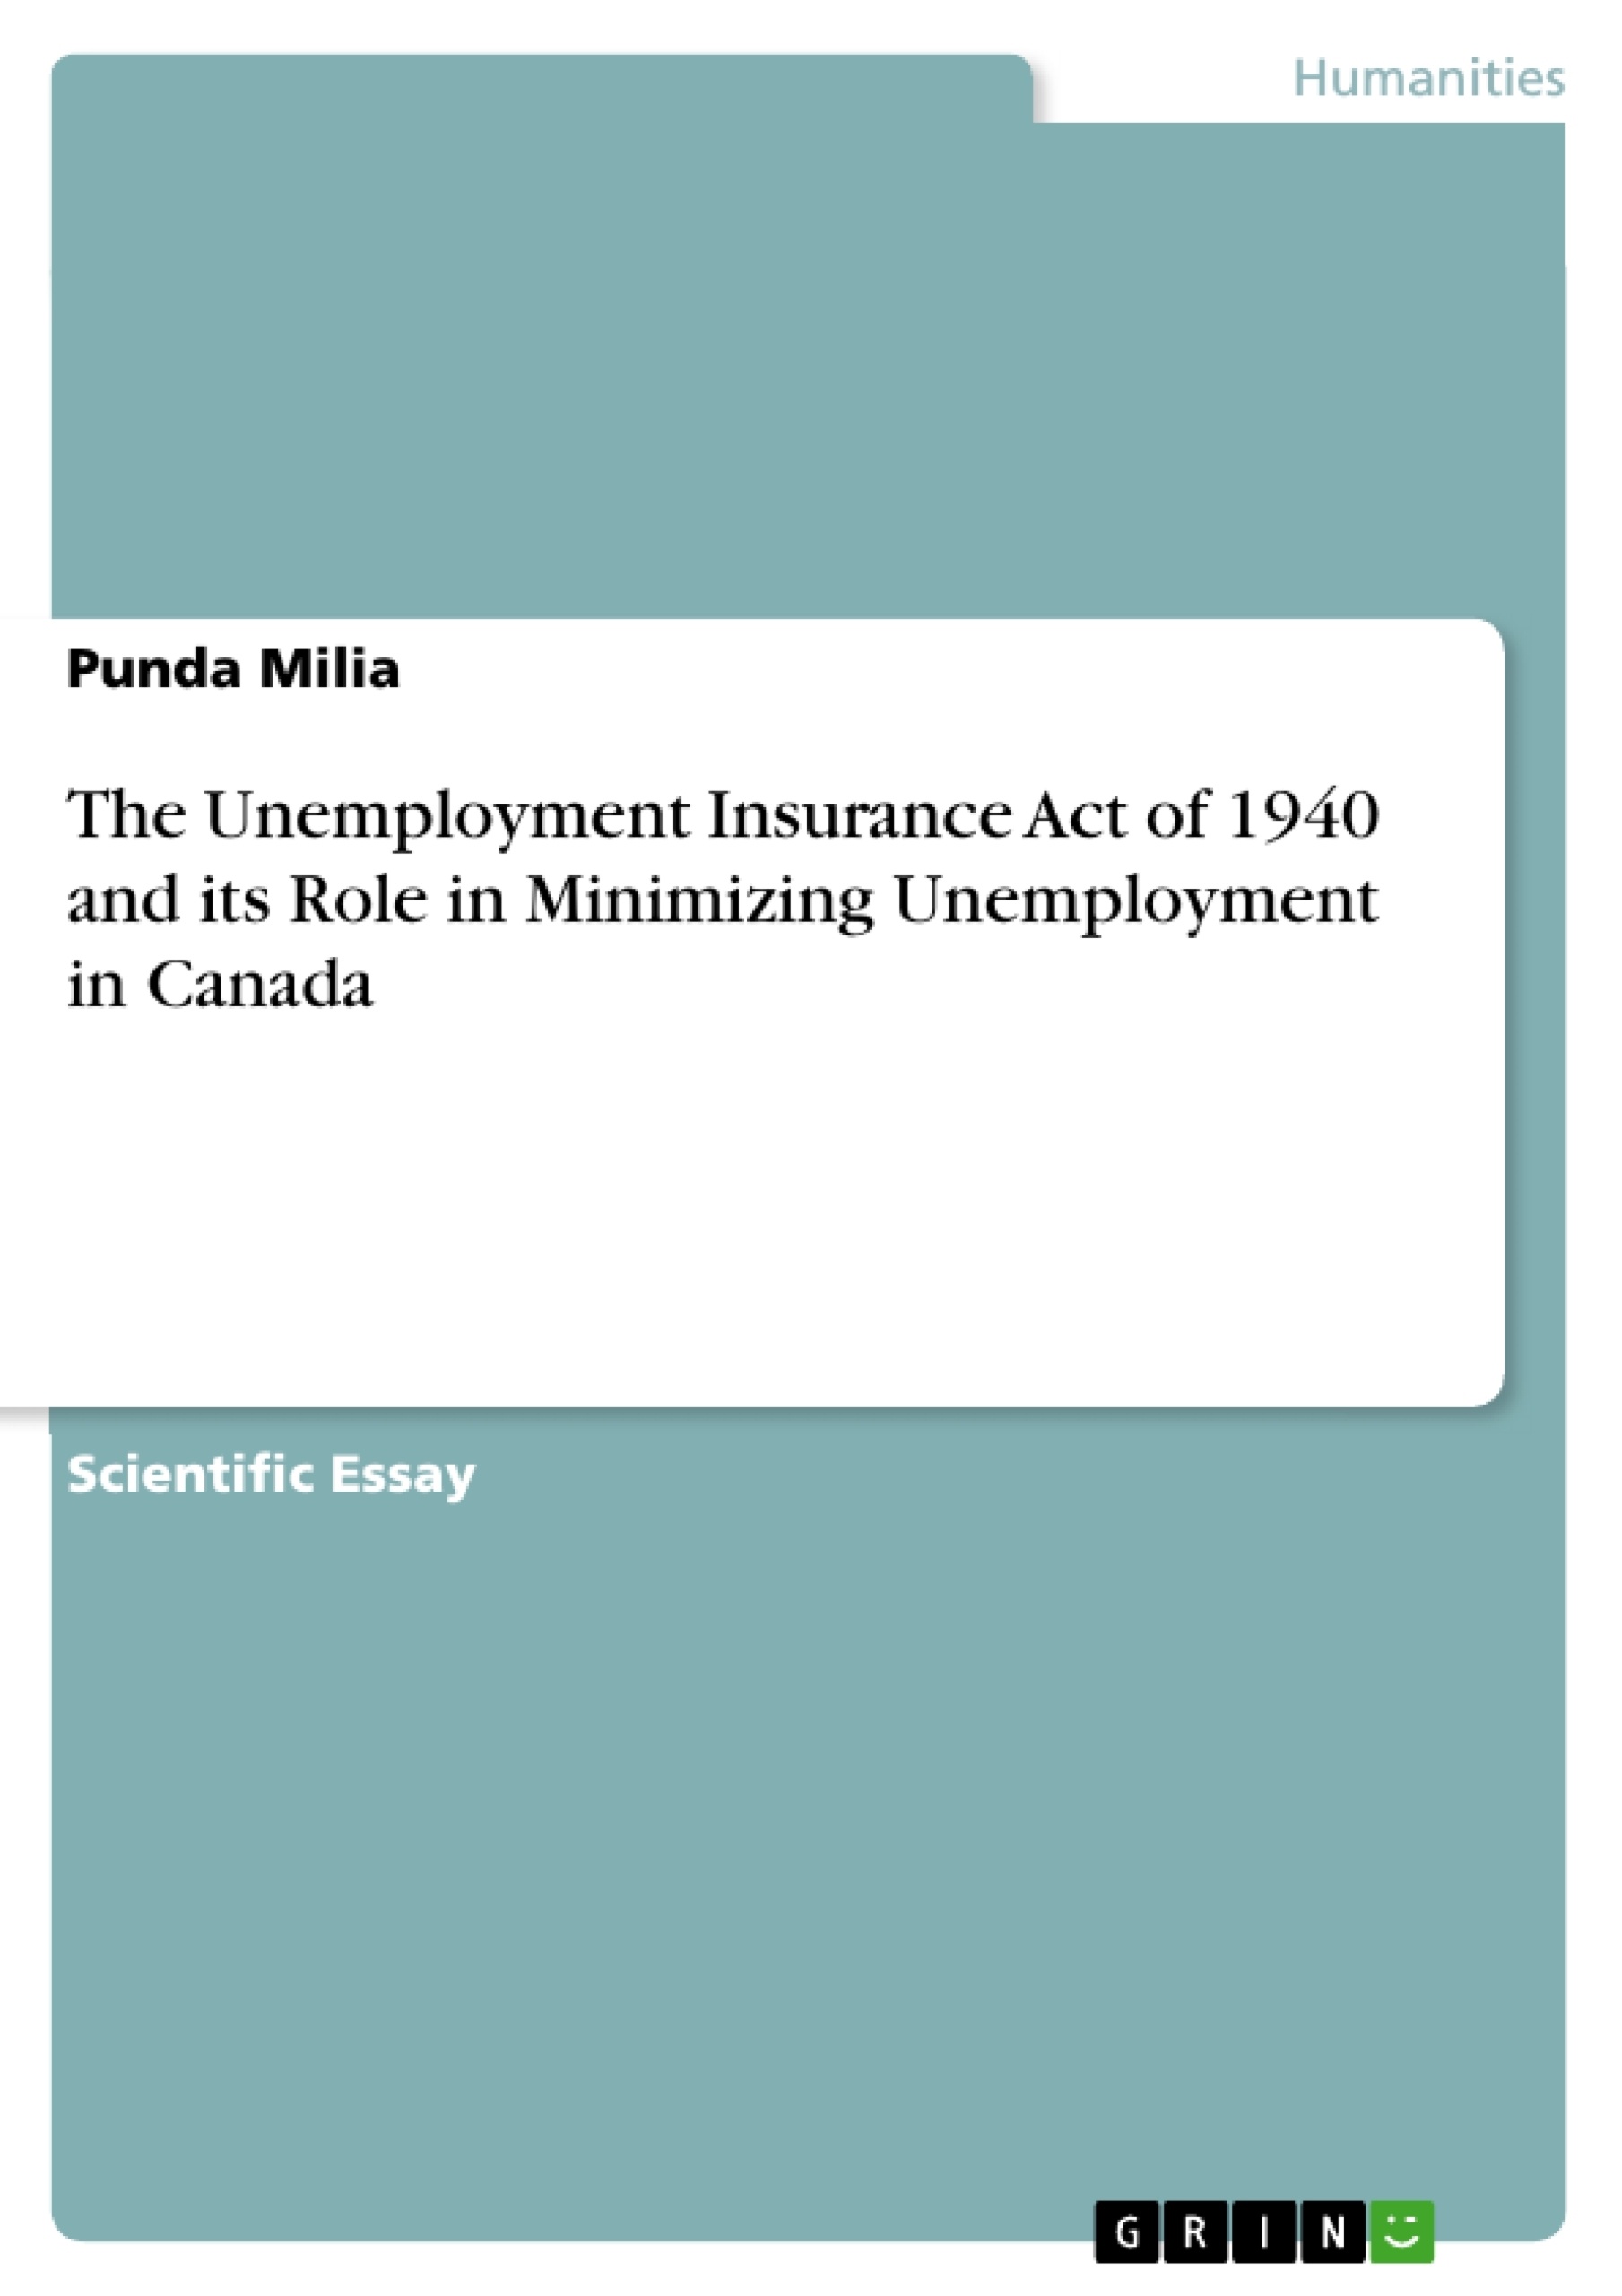 Title: The Unemployment Insurance Act of 1940 and its Role in Minimizing Unemployment in Canada